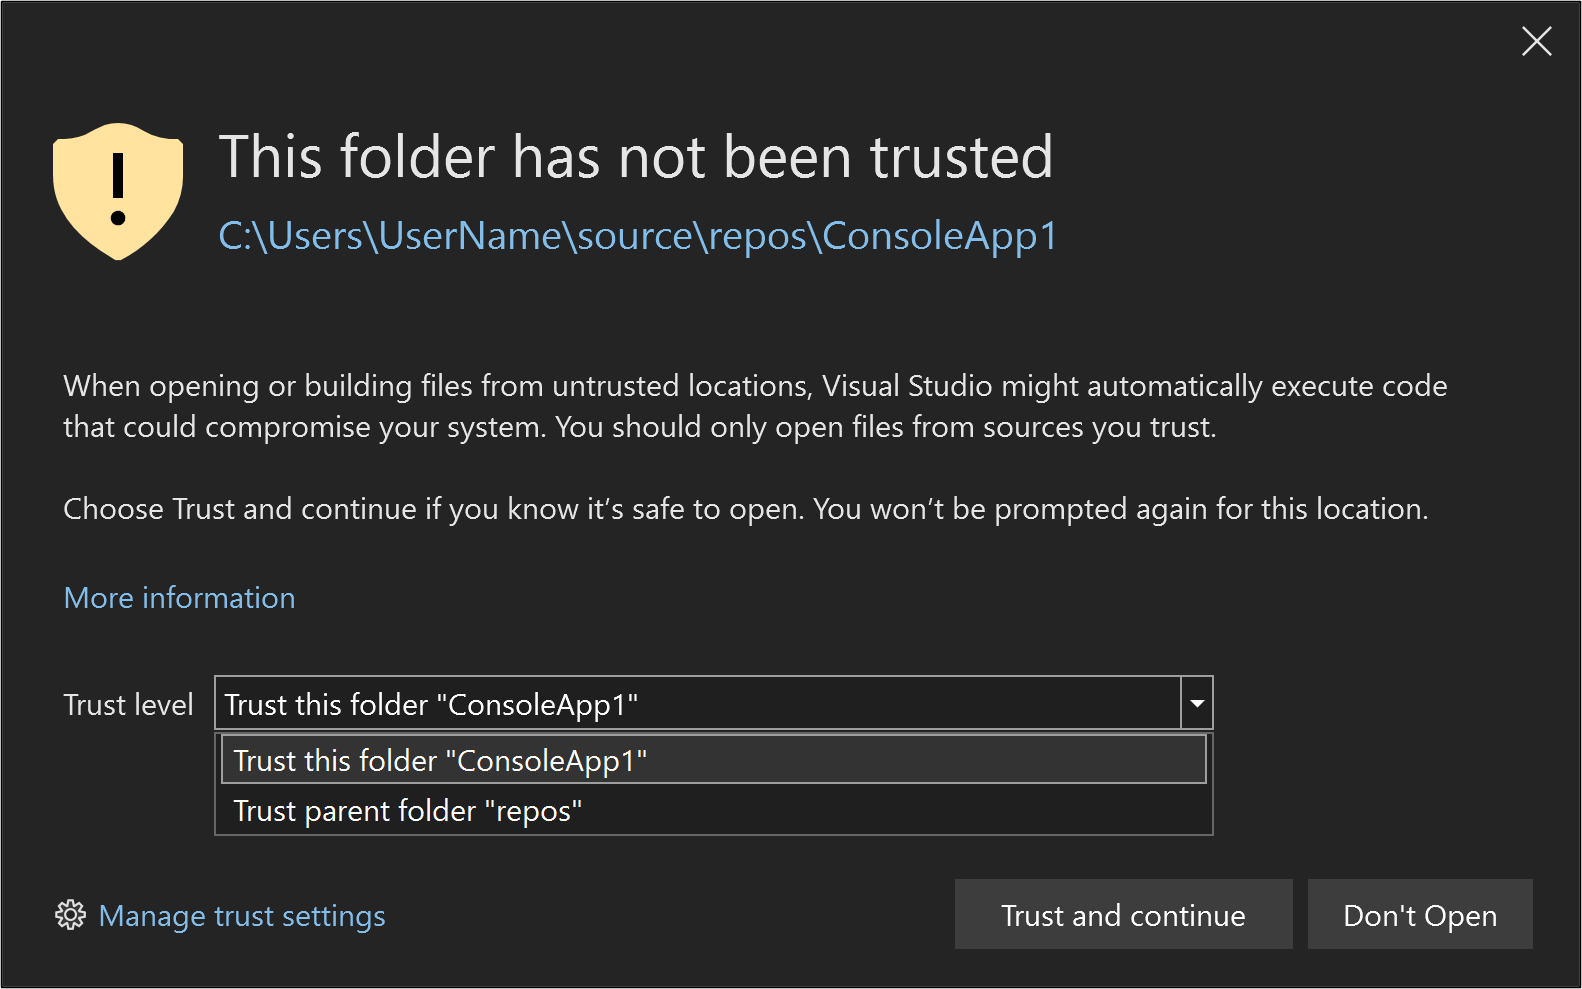 Screenshot showing how to trust a folder from the warning dialog.